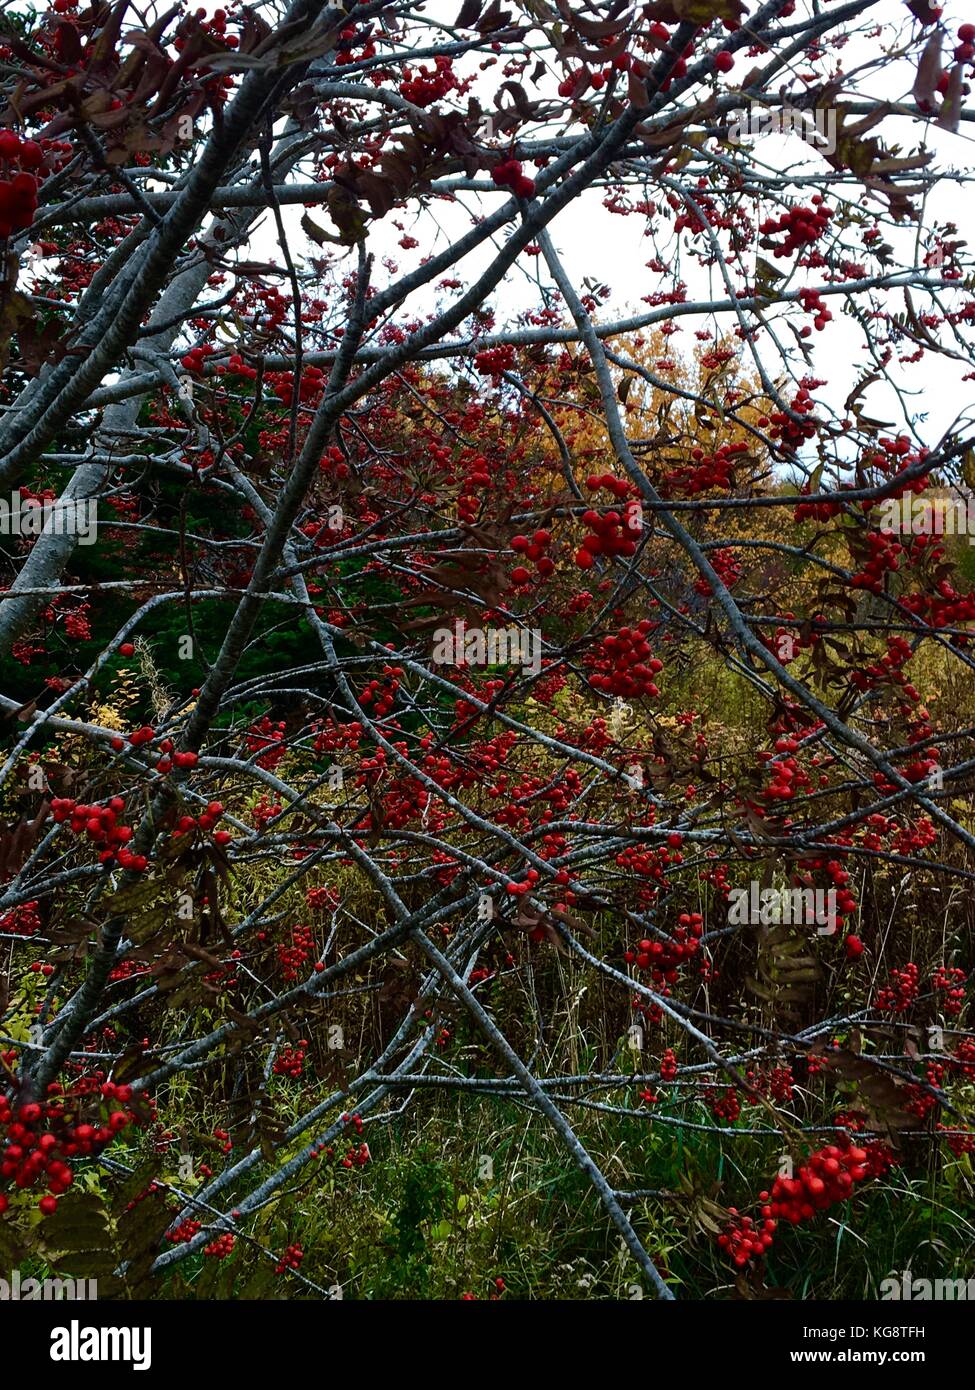 Berries on an American Mountain Ash (Dog Berry) tree. Other trees, with leaves turned to autumn colors can be seen through the branches Stock Photo